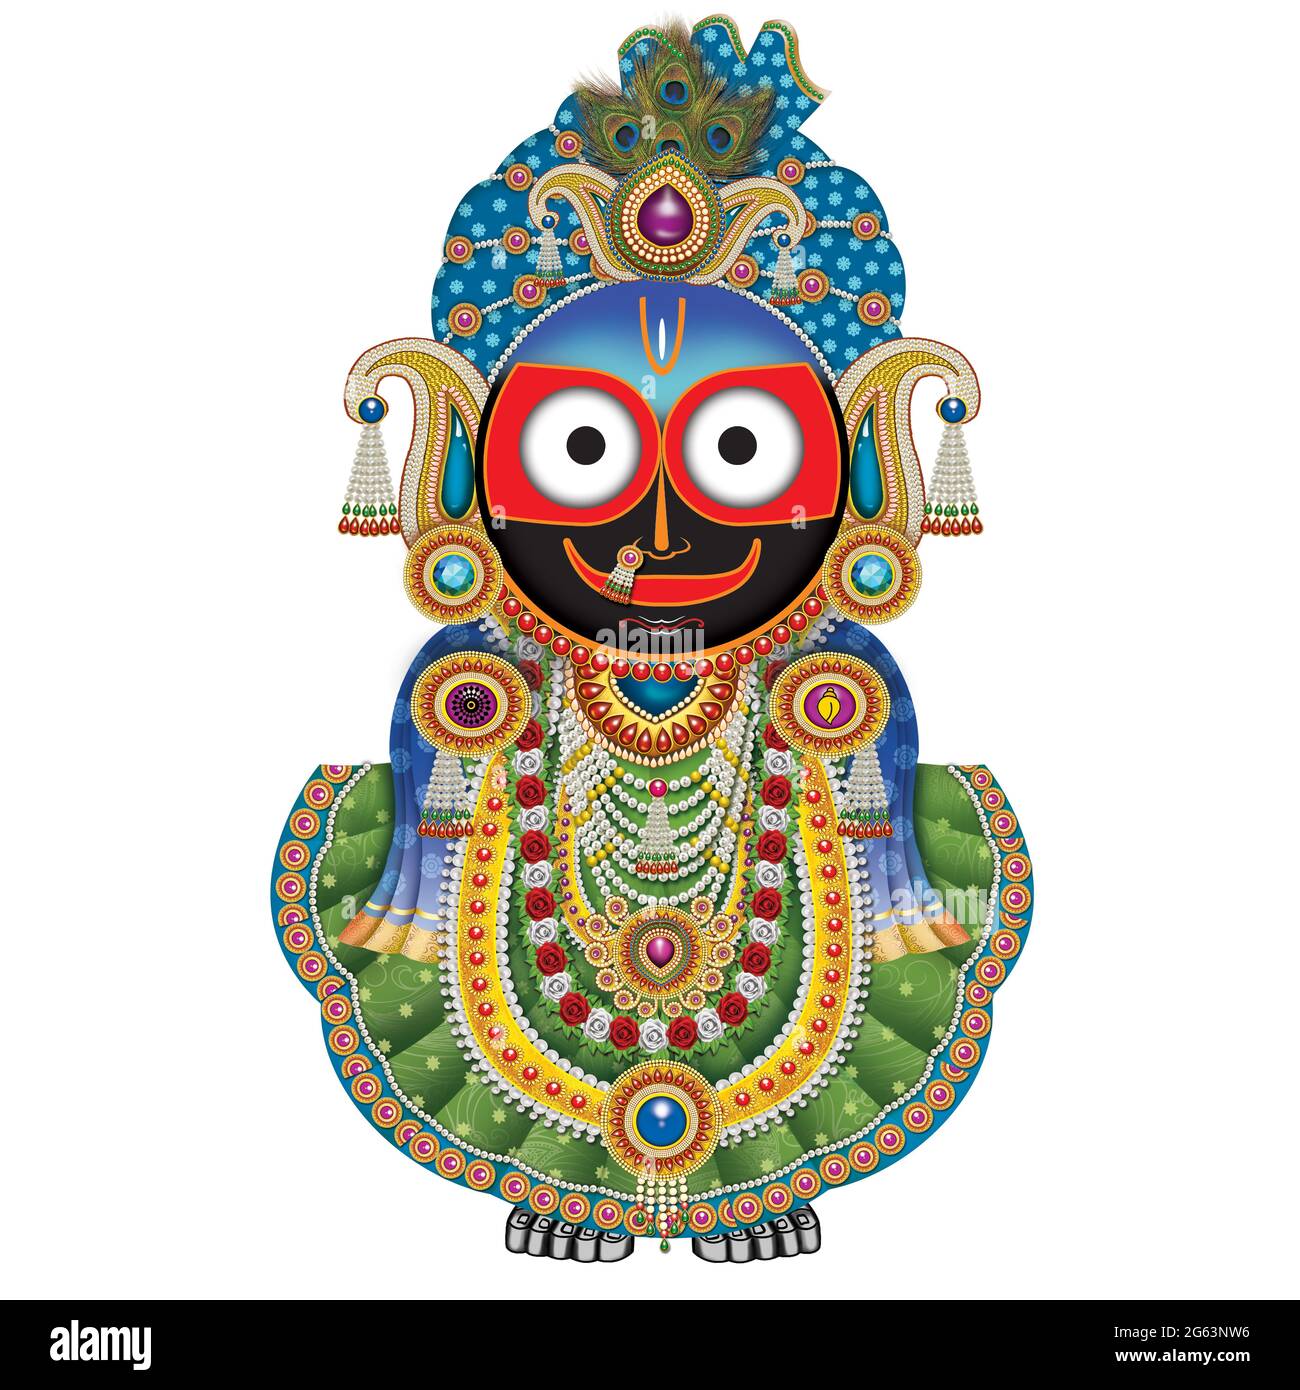 Discover more than 159 jagannath thakur drawing latest